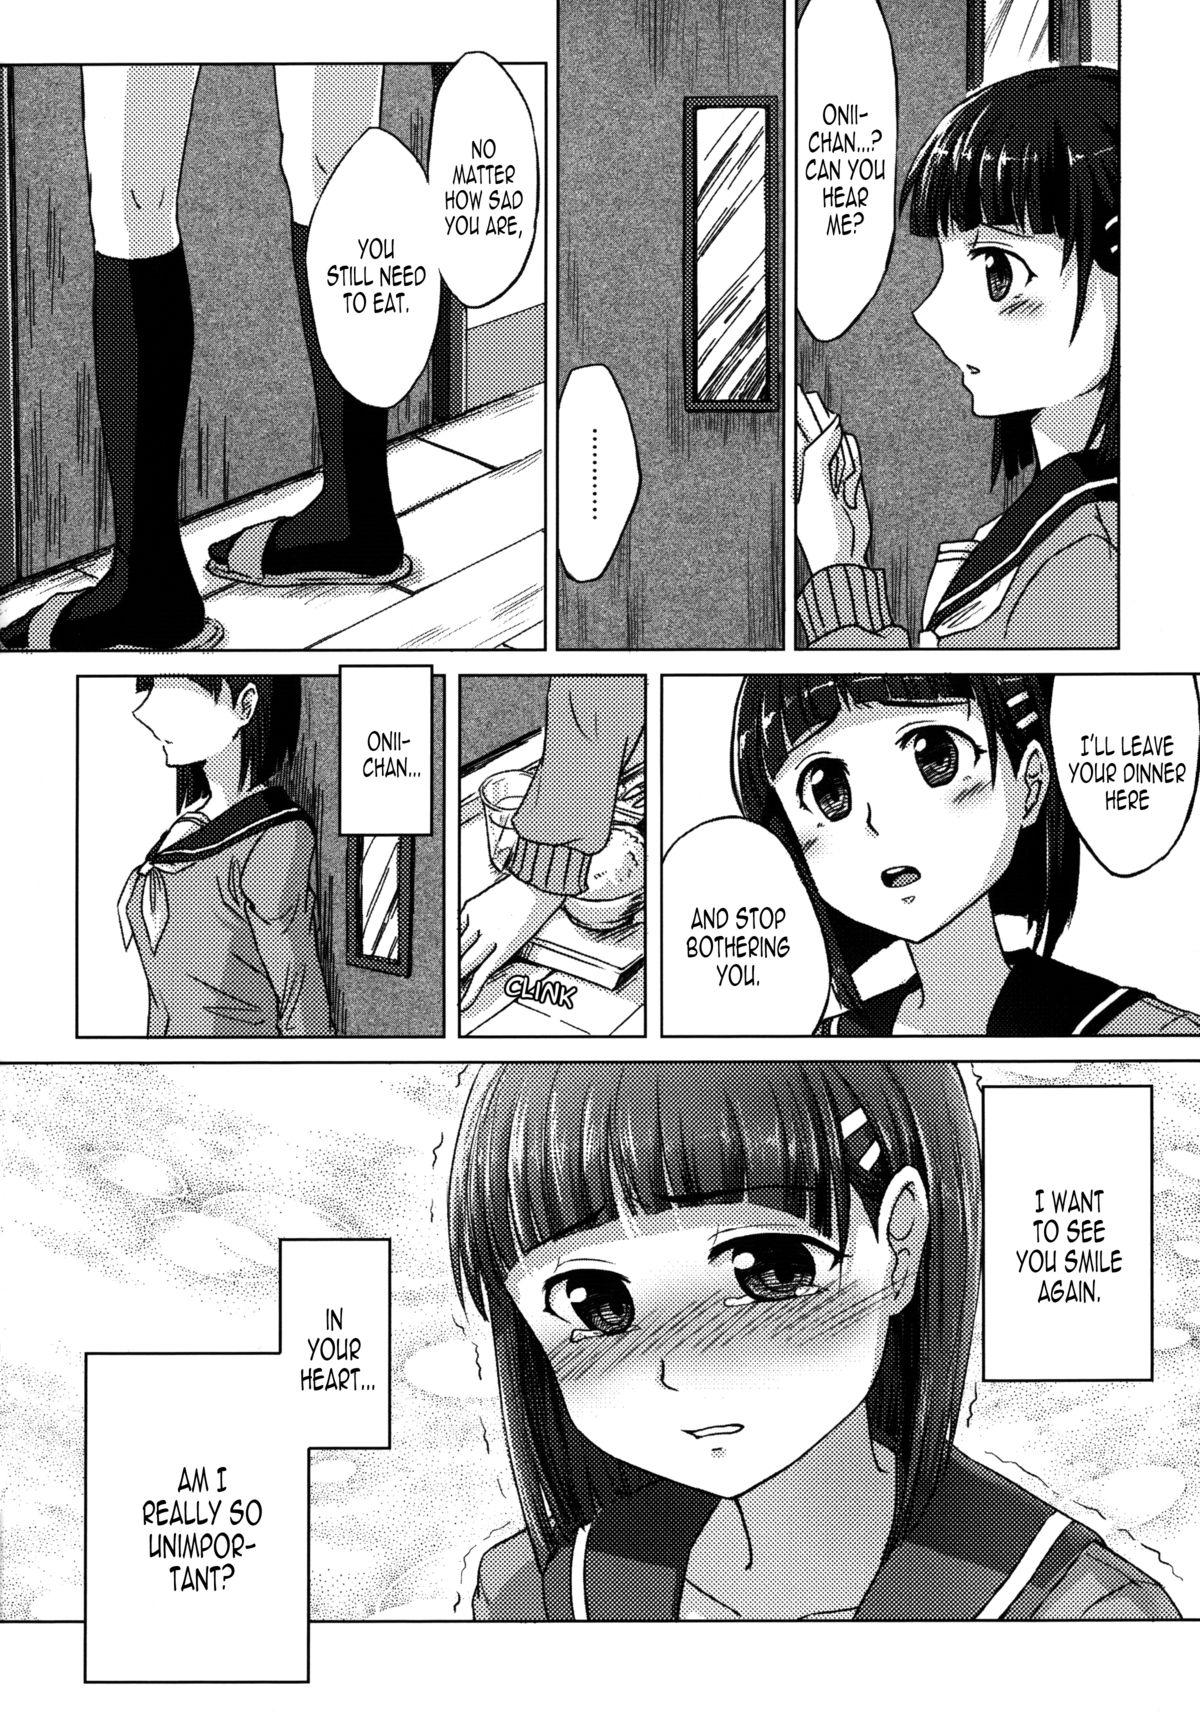 Kinky Imouto no Mousou Record | Record of My Sister's Delusion - Sword art online Mask - Page 6